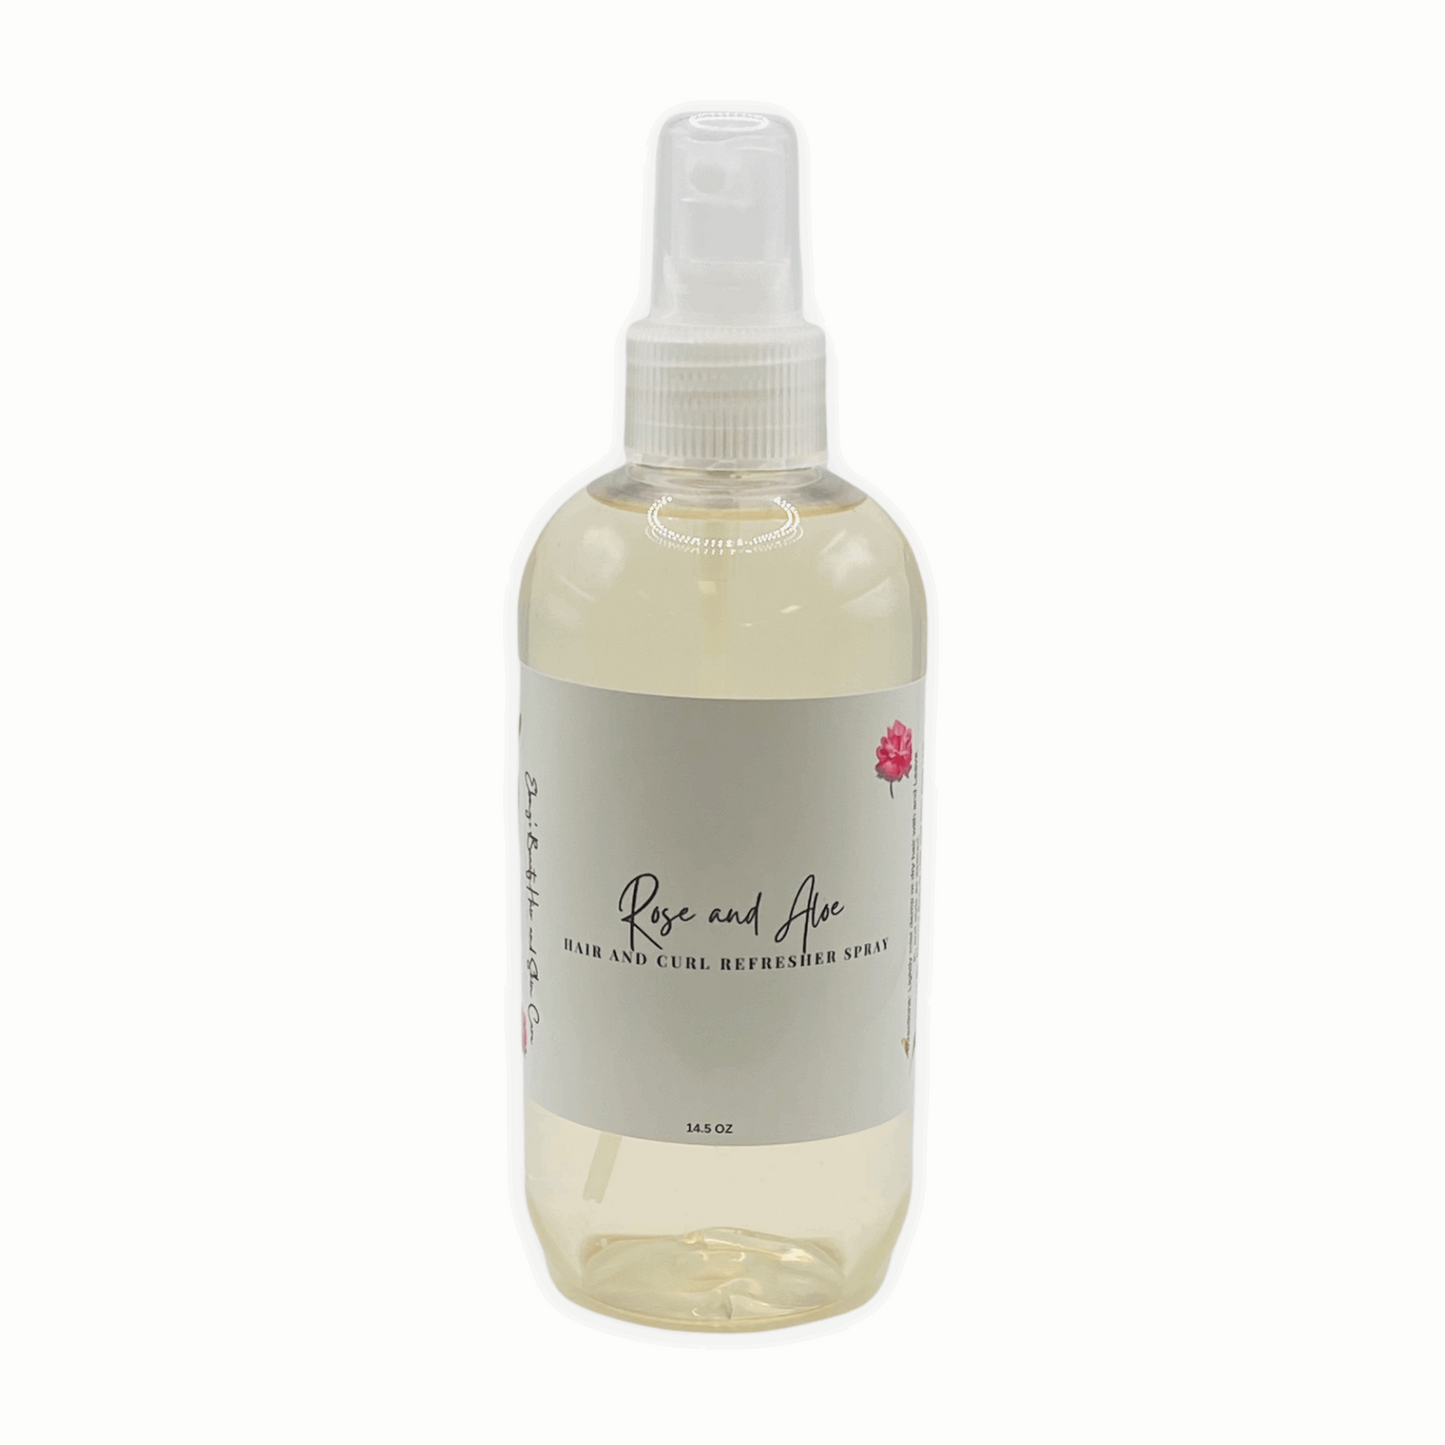 Ebony's Aloe and Rose Hair Curl Refresher Spray Strengthening, Anti-Breakage, Curl Enhancing, For curl types: 2B, 2C, 3A, 3B, 3C, 4A, 4B, 4C. Perfect for weak, breakage-prone hair.